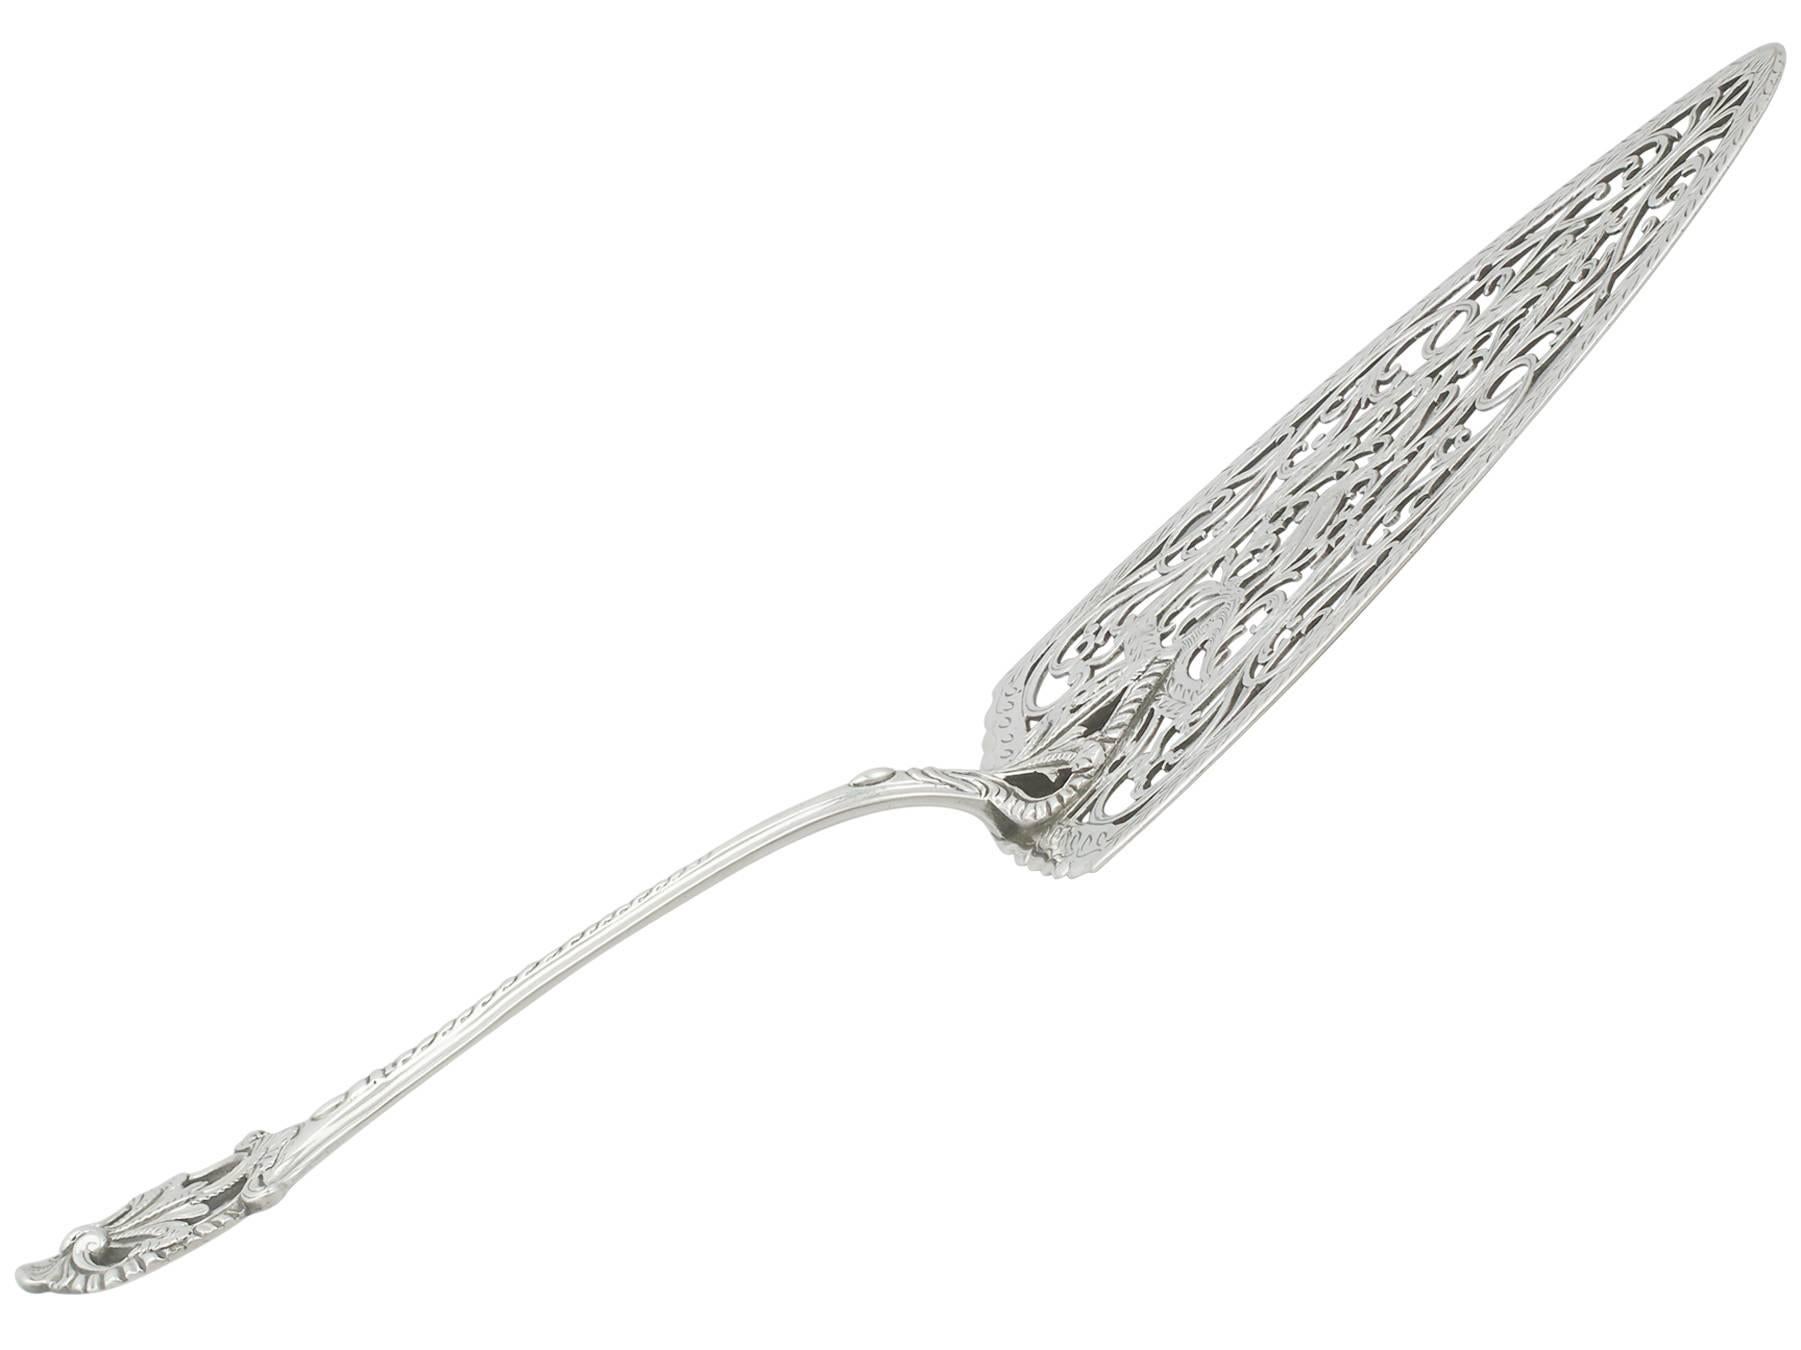 An exceptional, fine and impressive antique Georgian English sterling silver fish slice / pudding trowel; an addition to our silver flatware collection

This exceptional antique Georgian silver fish slice / pudding trowel, in sterling standard,